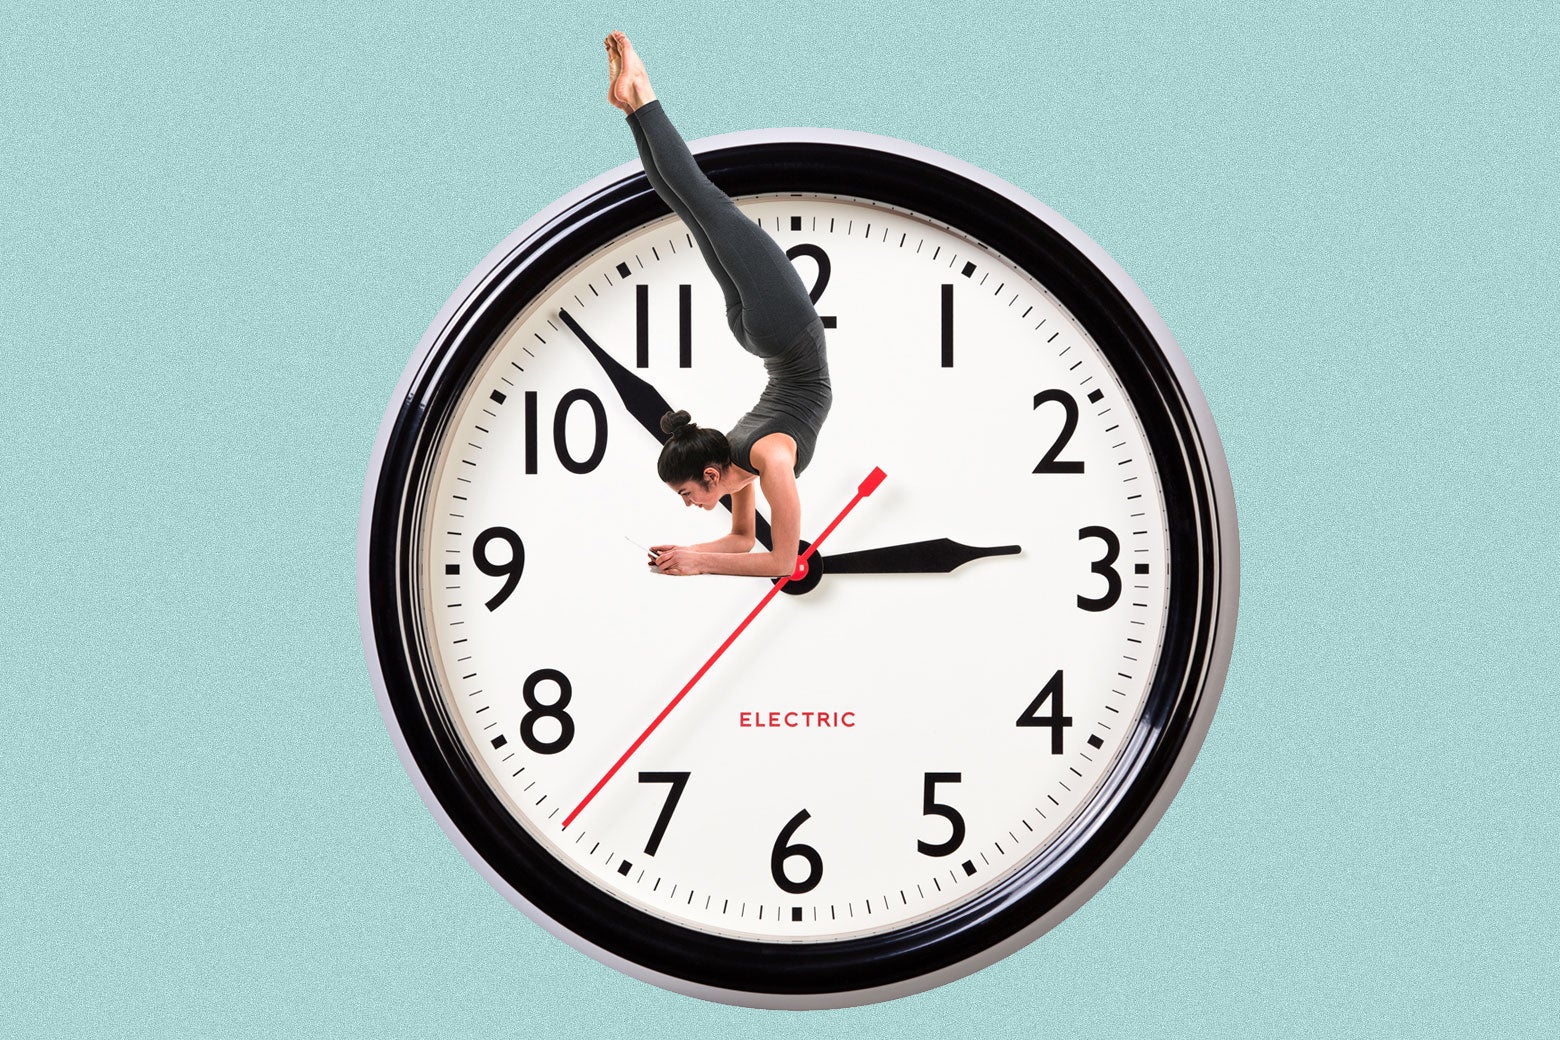 A woman is seen exercising, placed within a wall clock.